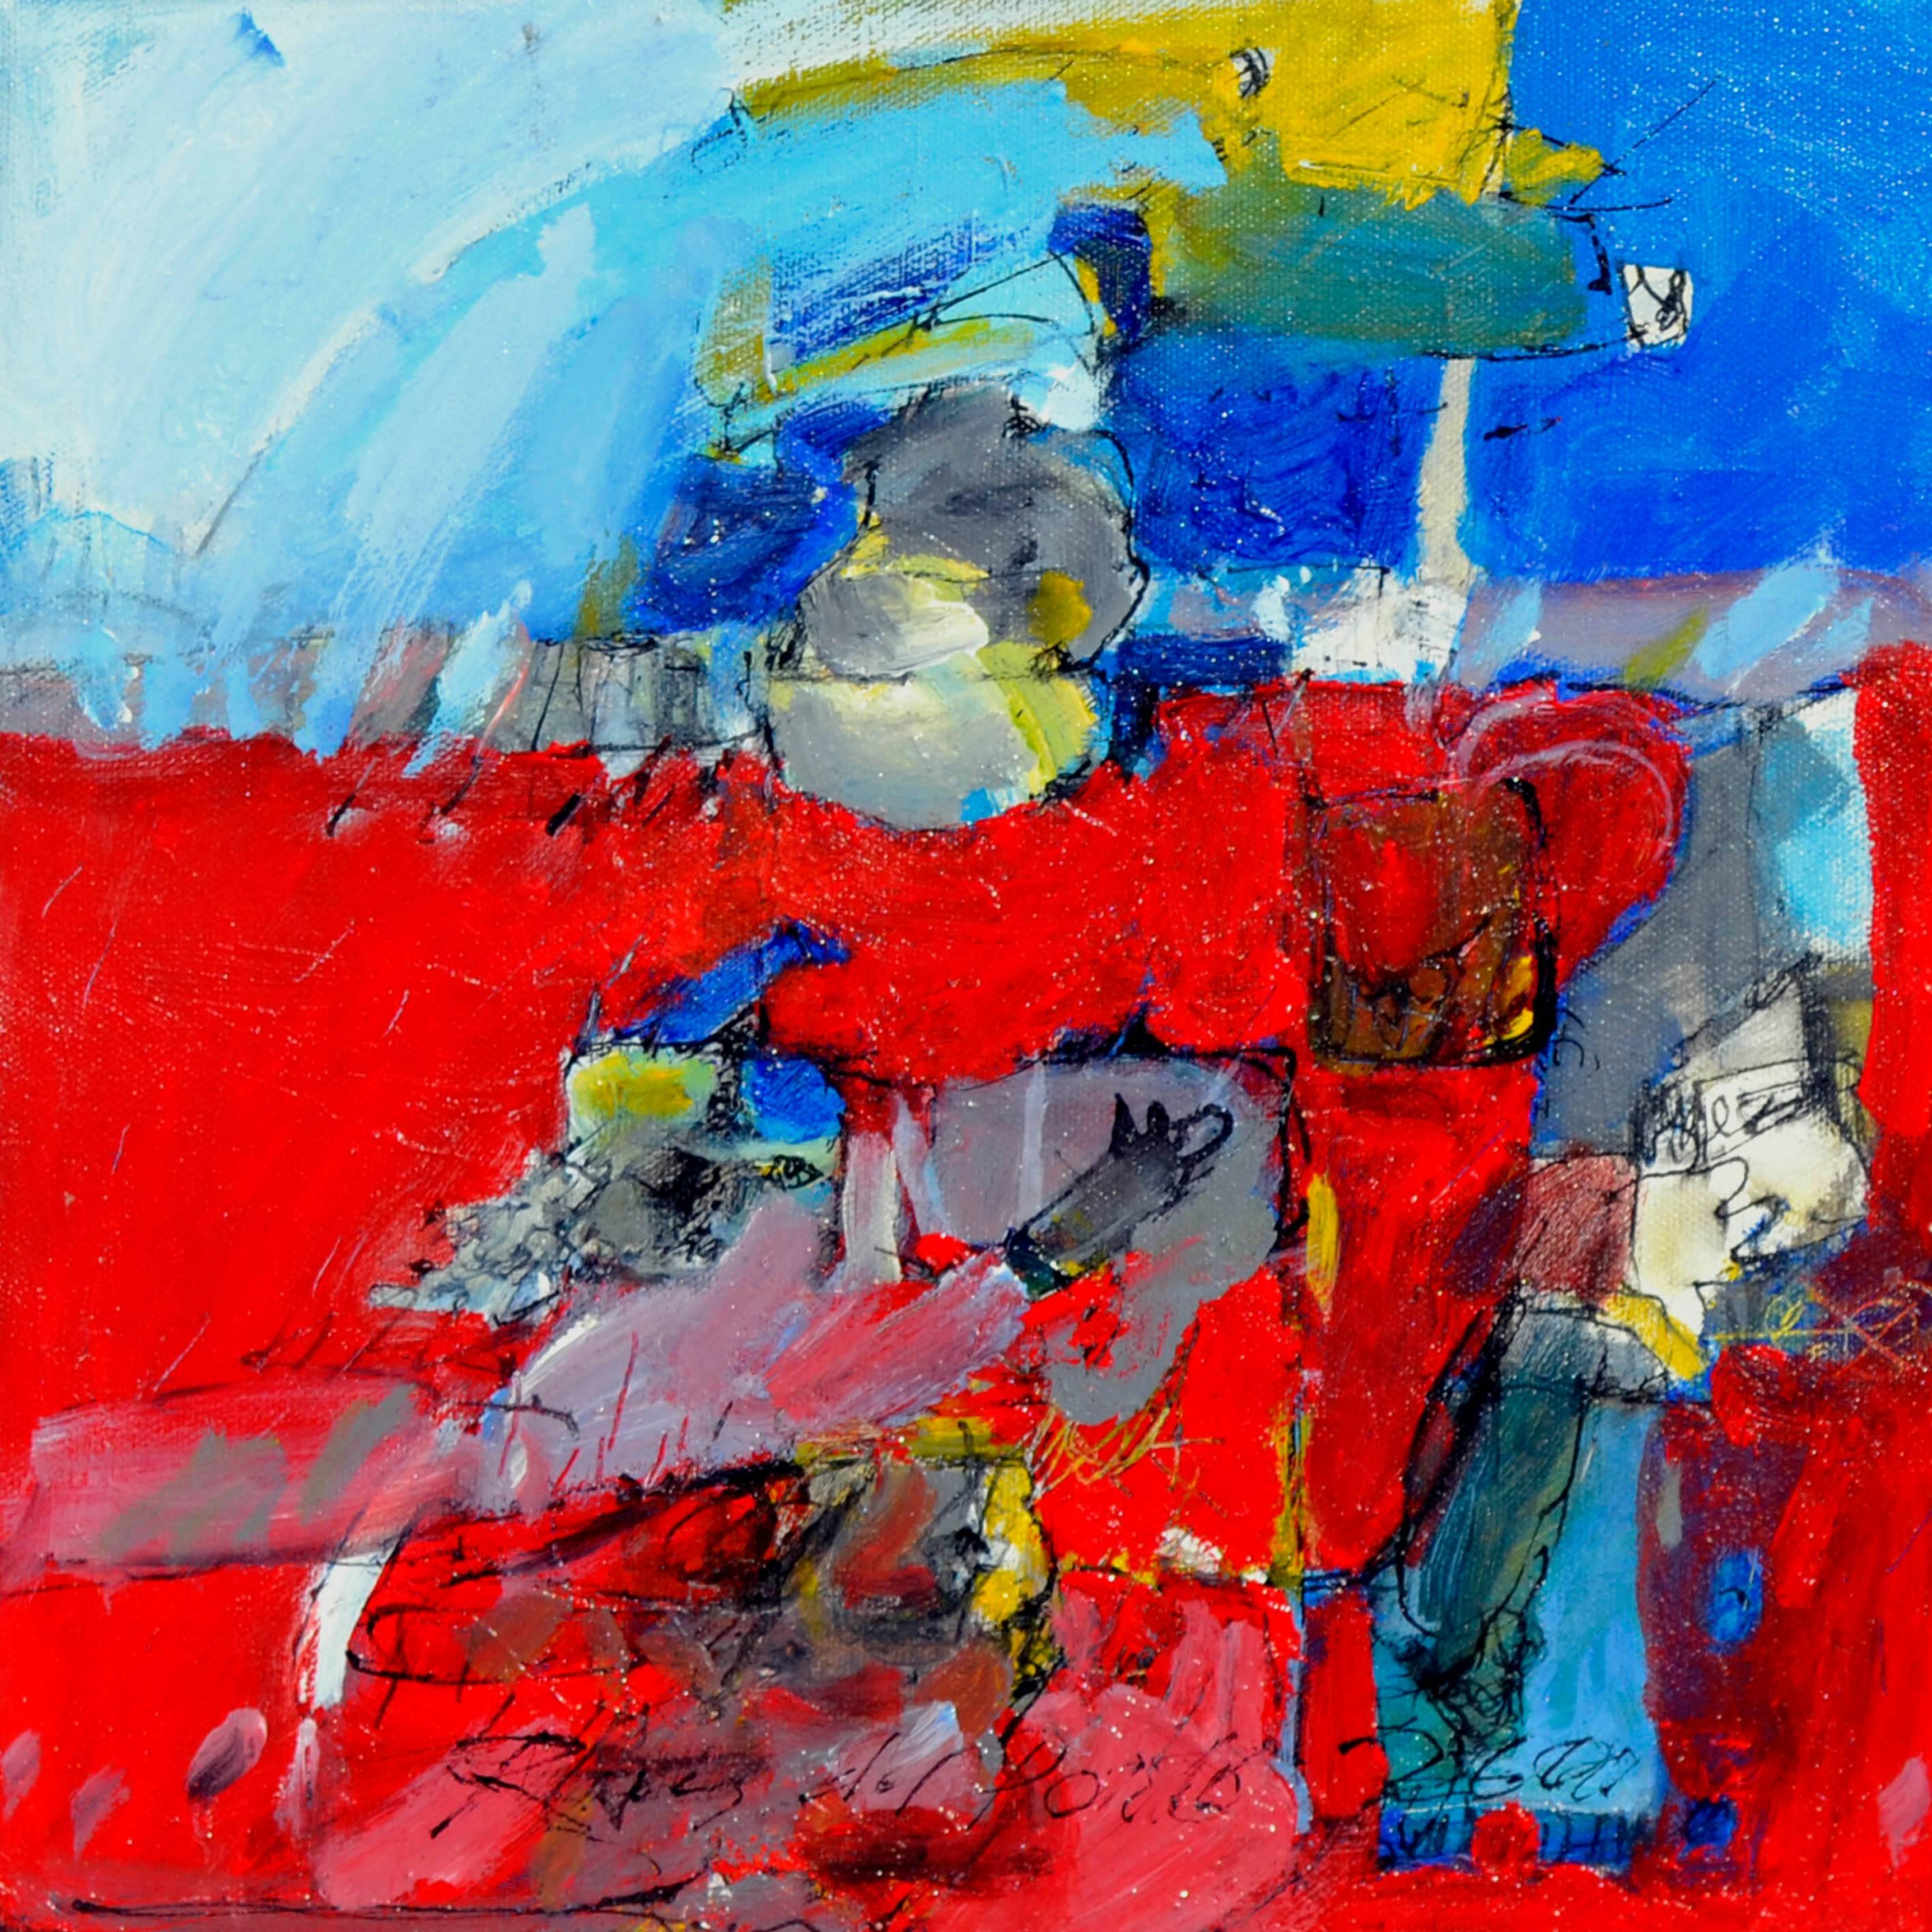 Fetishes, Abstract in Red, Blue and Yellow - Painting by Francisco Ruiz del Porto